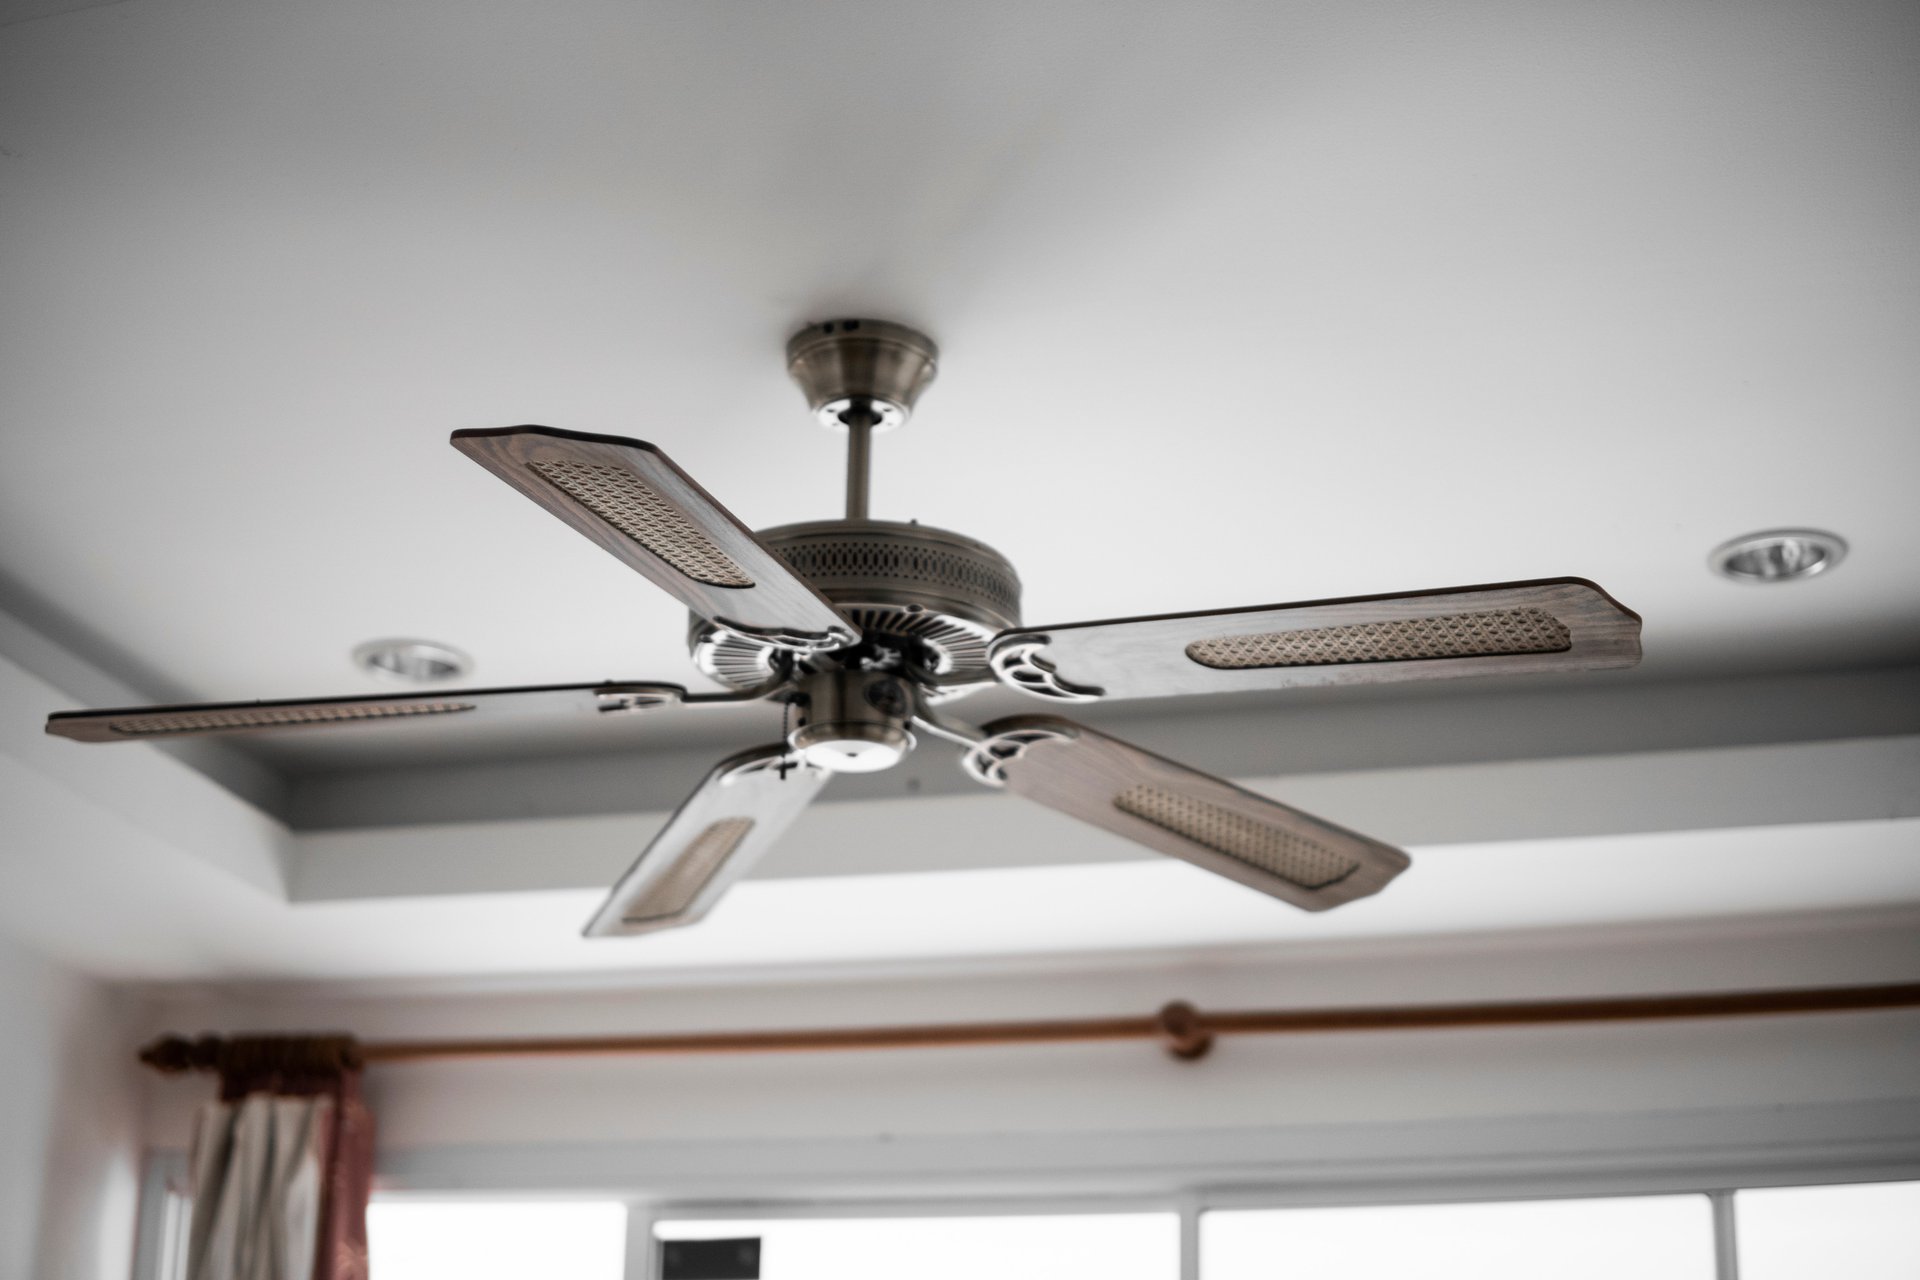 News Picture: How Kids Are Being Injured by Ceiling Fans